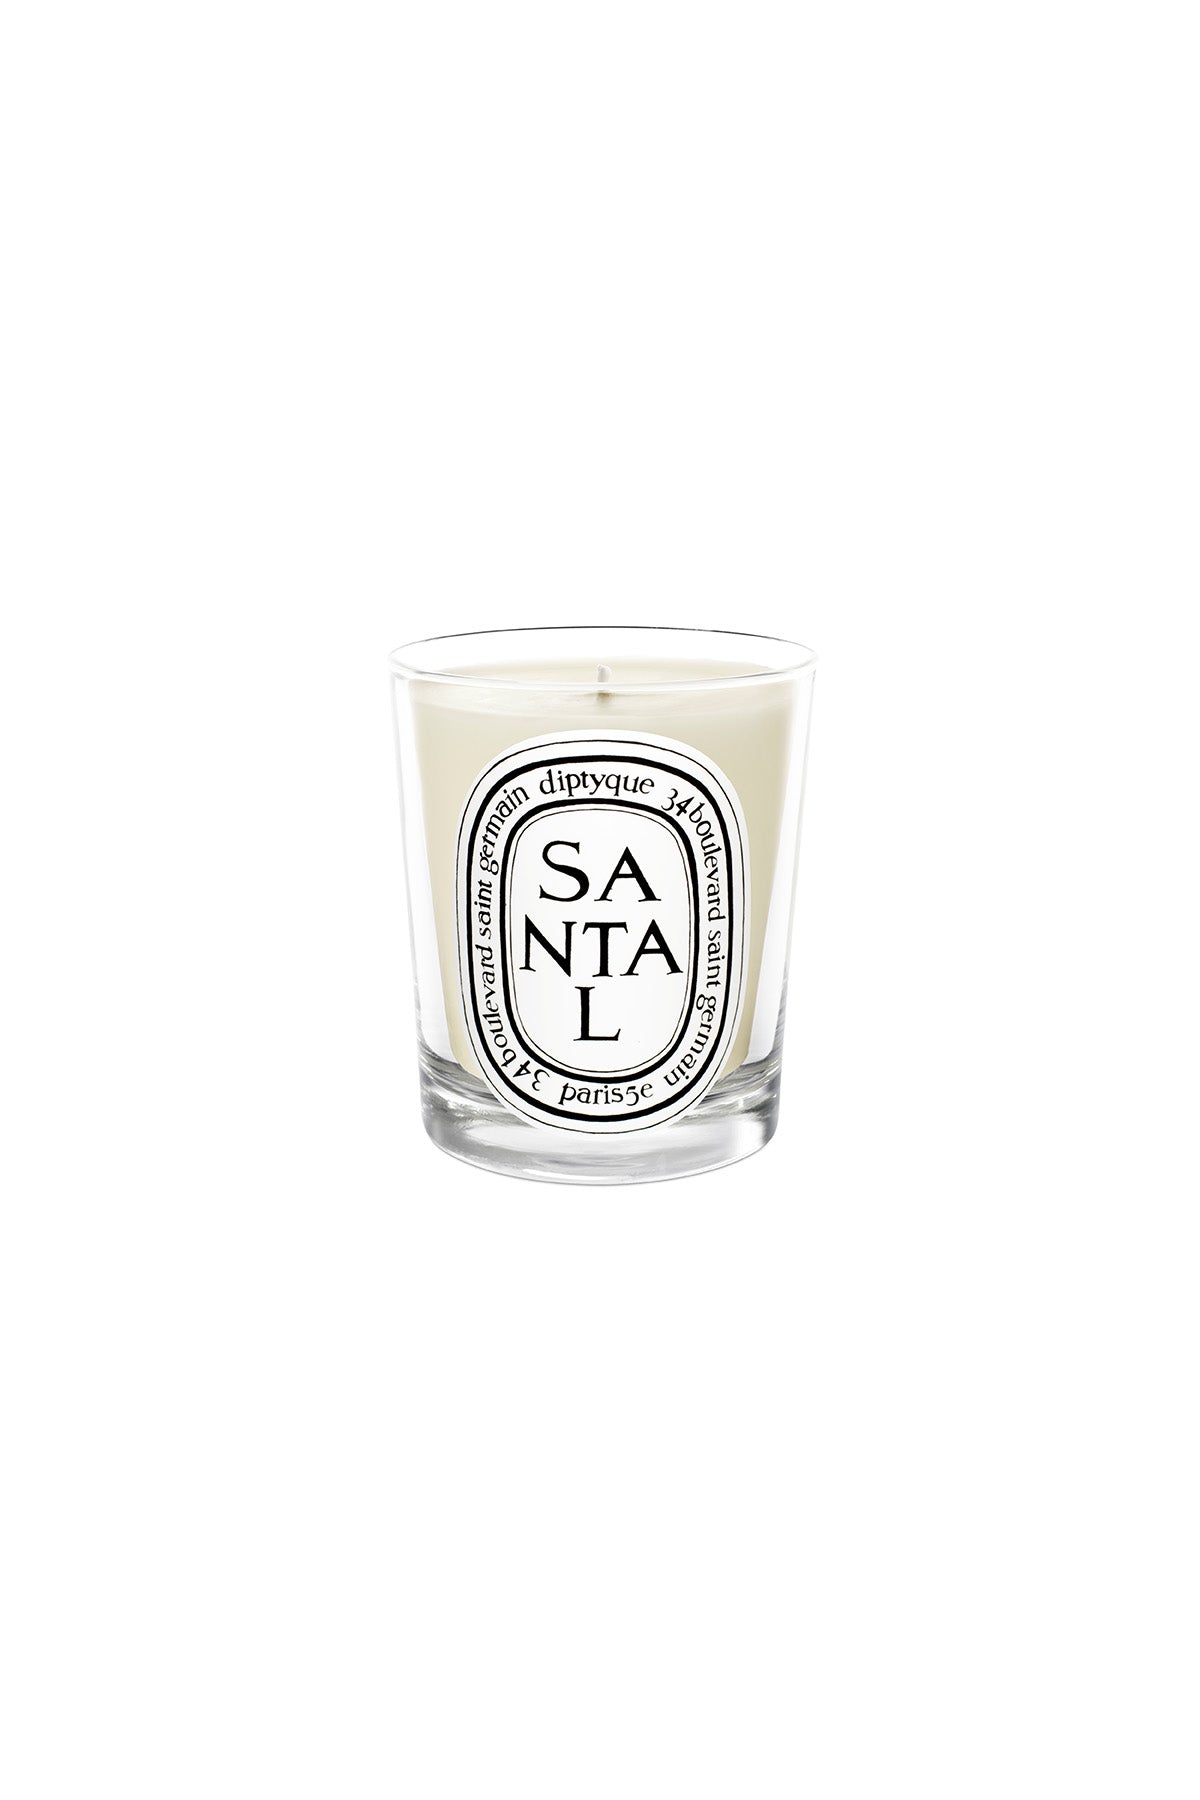 DIPTYQUE | SANTAL CANDLE